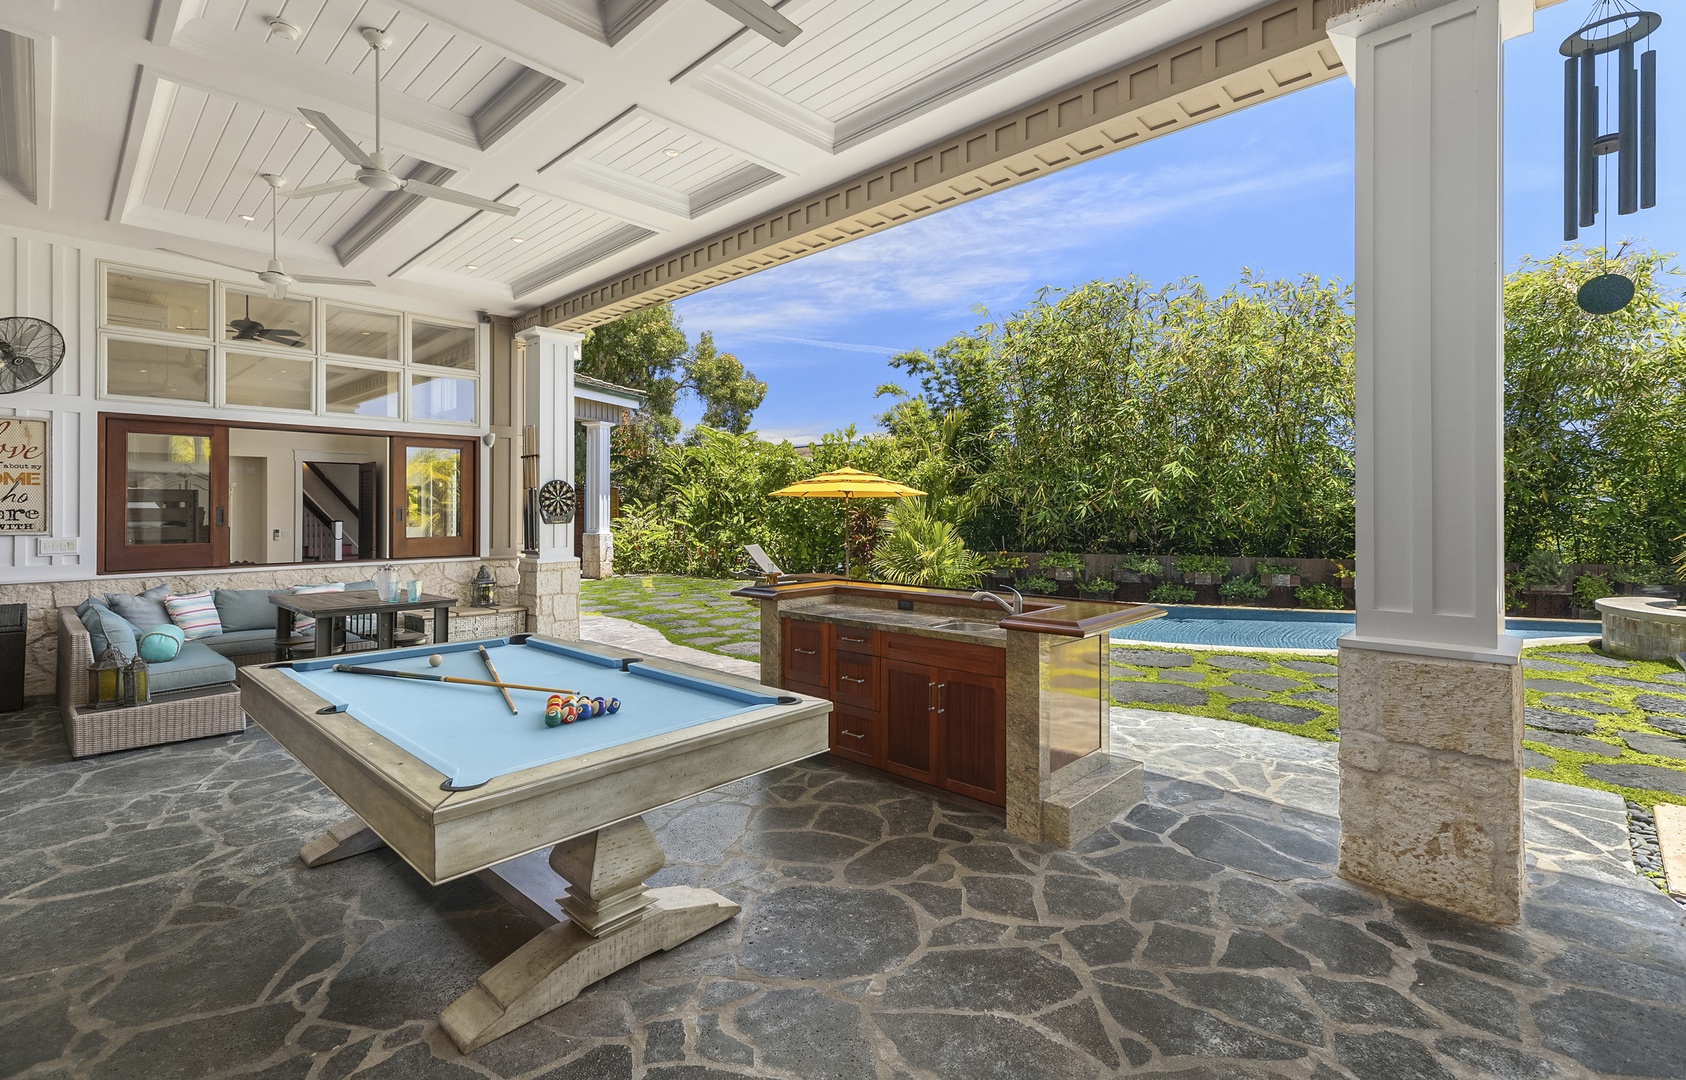 Kailua Vacation Rentals, Lanikai Villa* - Challenge family and friends to a round of billiards in the game room that opens to the pool